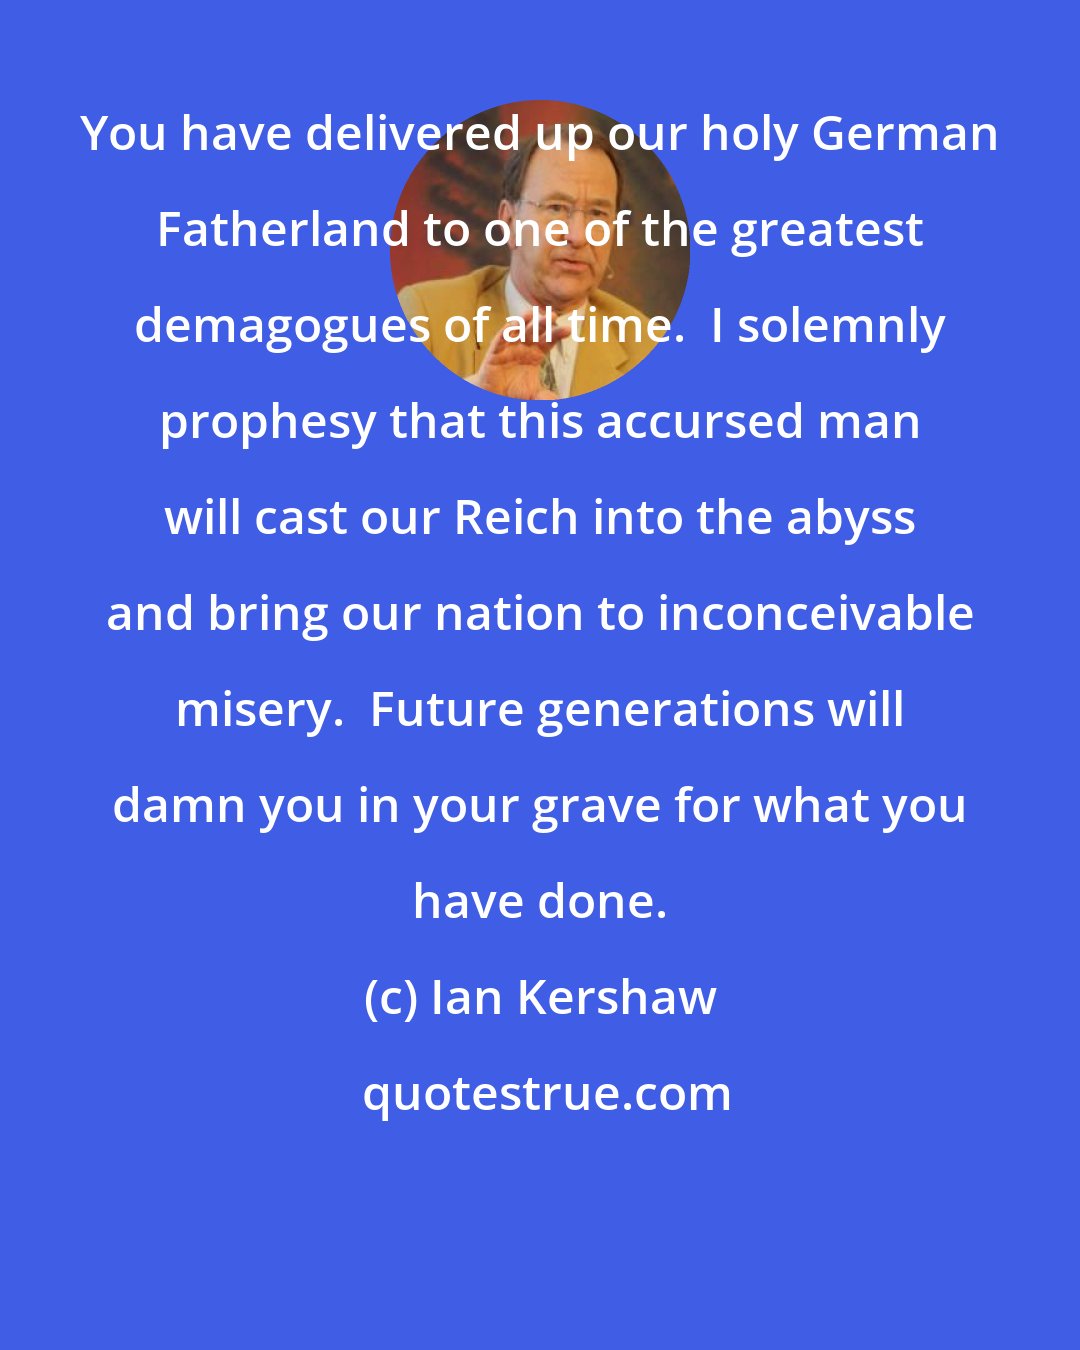 Ian Kershaw: You have delivered up our holy German Fatherland to one of the greatest demagogues of all time.  I solemnly prophesy that this accursed man will cast our Reich into the abyss and bring our nation to inconceivable misery.  Future generations will damn you in your grave for what you have done.